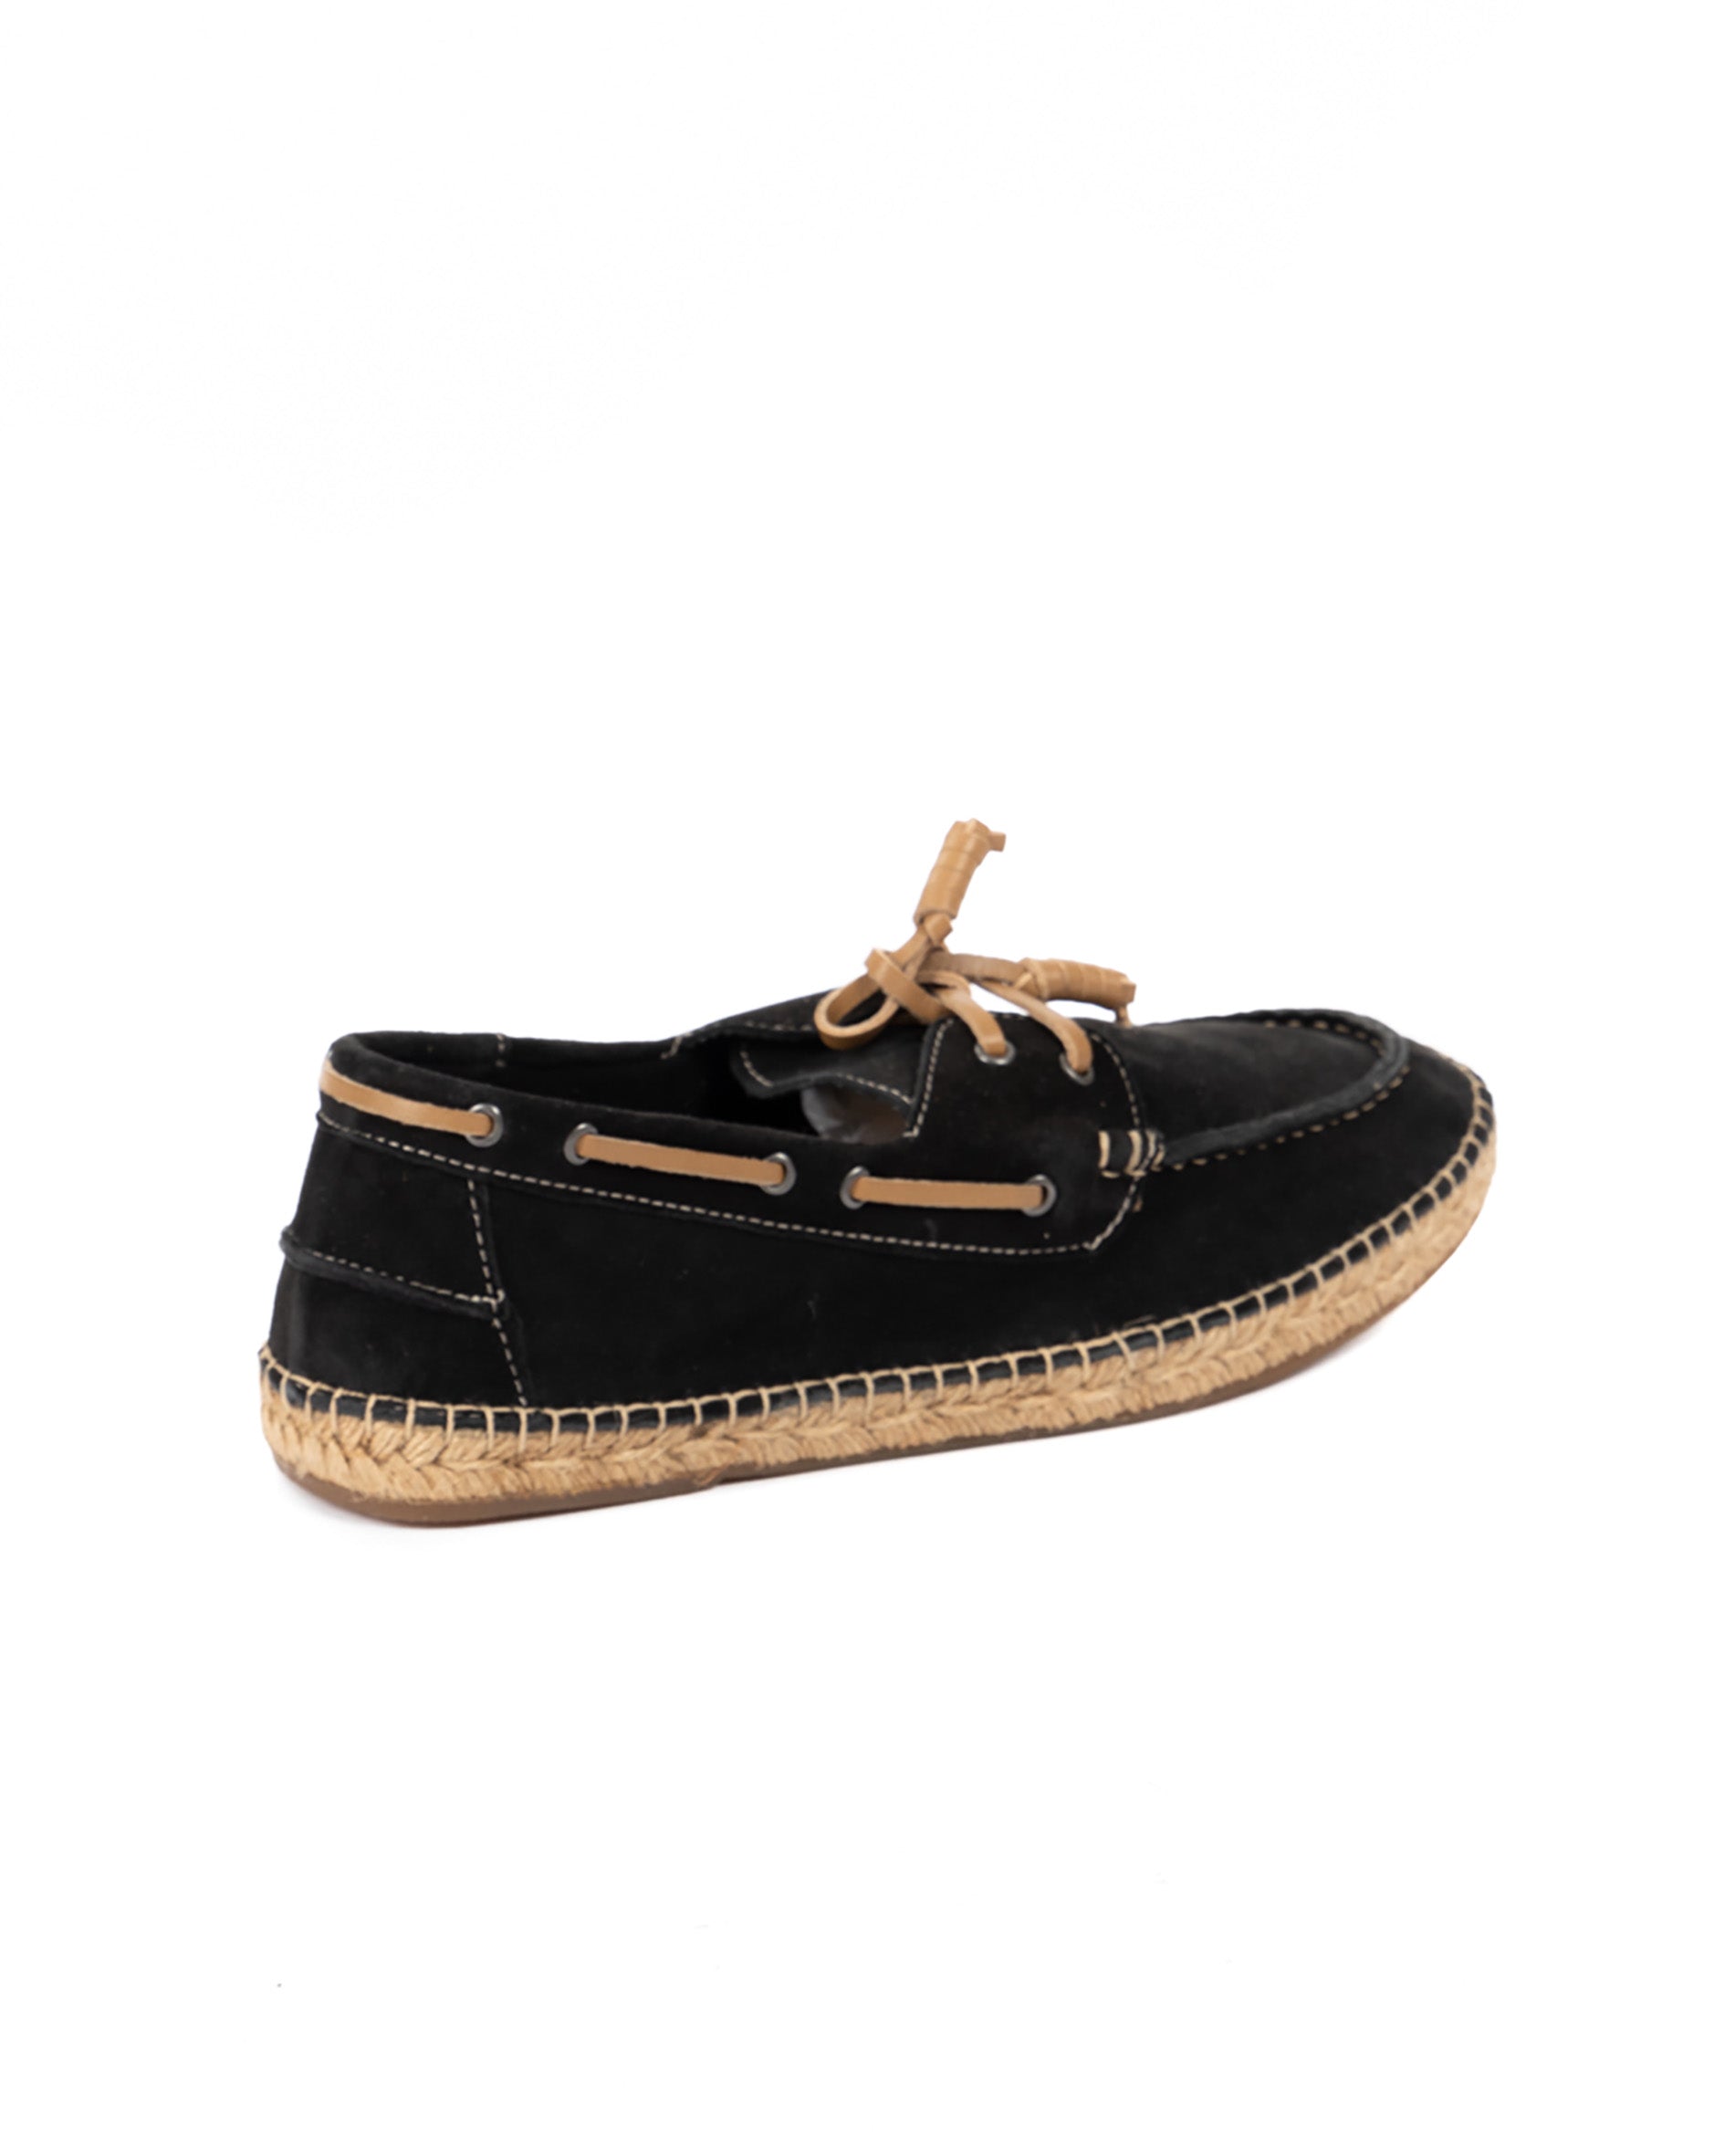 Pompeii - black suede boat with rope bottom